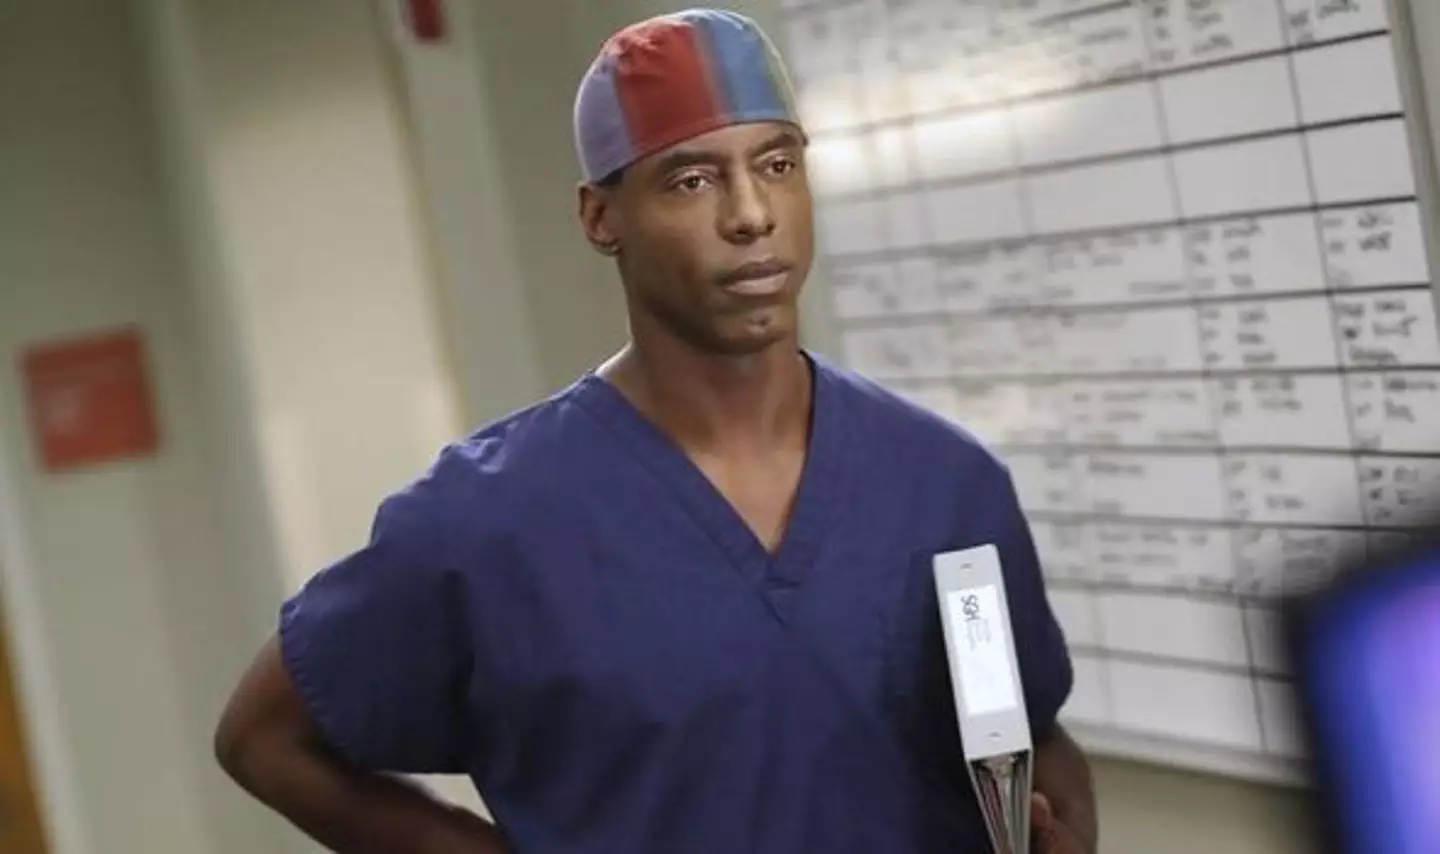 Washington was fired from Grey's Anatomy in 2007.